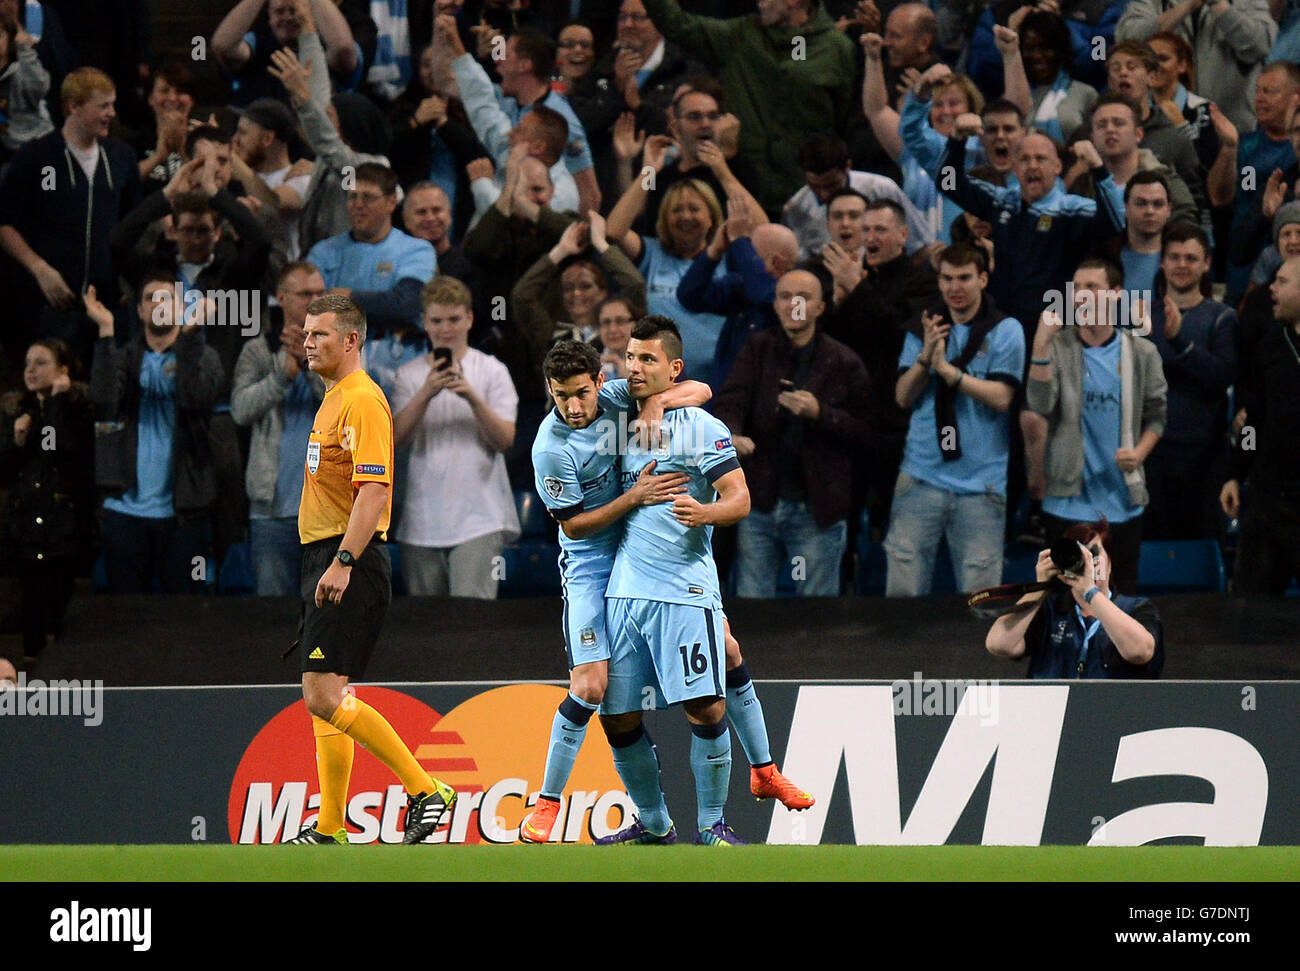 Manchester City's Sergio Aguero celebrates scoring the opening goal of the game during the UEFA Champions League match at the Etihad Stadium, Manchester. PRESS ASSOCIATION Photo. Picture date: Tuesday September 30, 2014, See PA story SOCCER Man City. Photo credit should read: Martin Rickett/PA Wire. Stock Photo